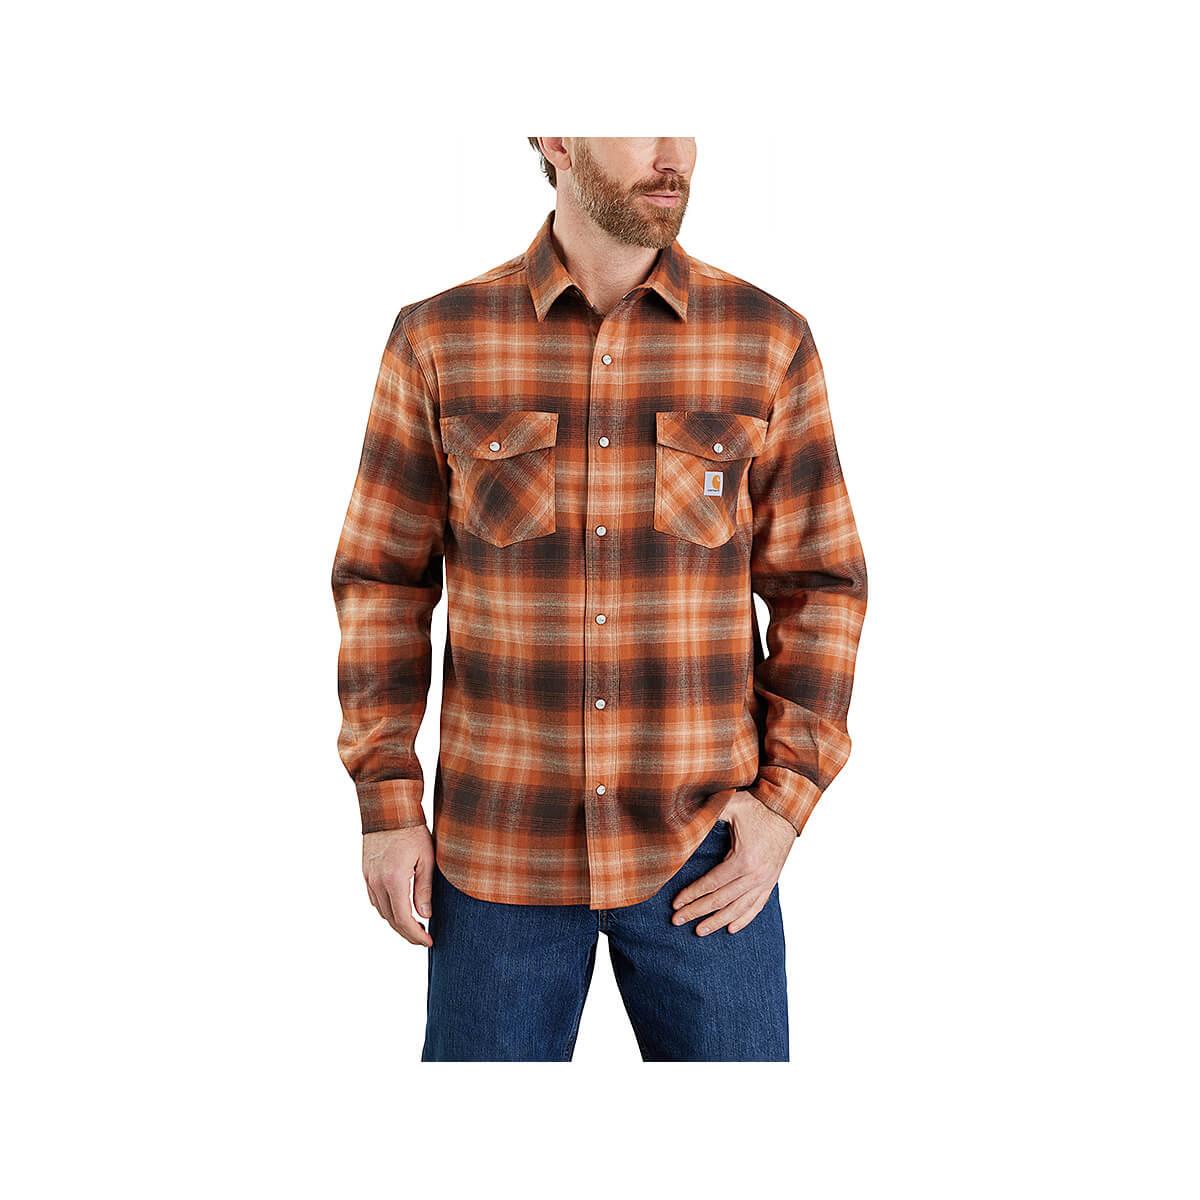  Men's Rugged Flex Relaxed Fit Midweight Flannel Long Sleeve Snap Front Plaid Shirt